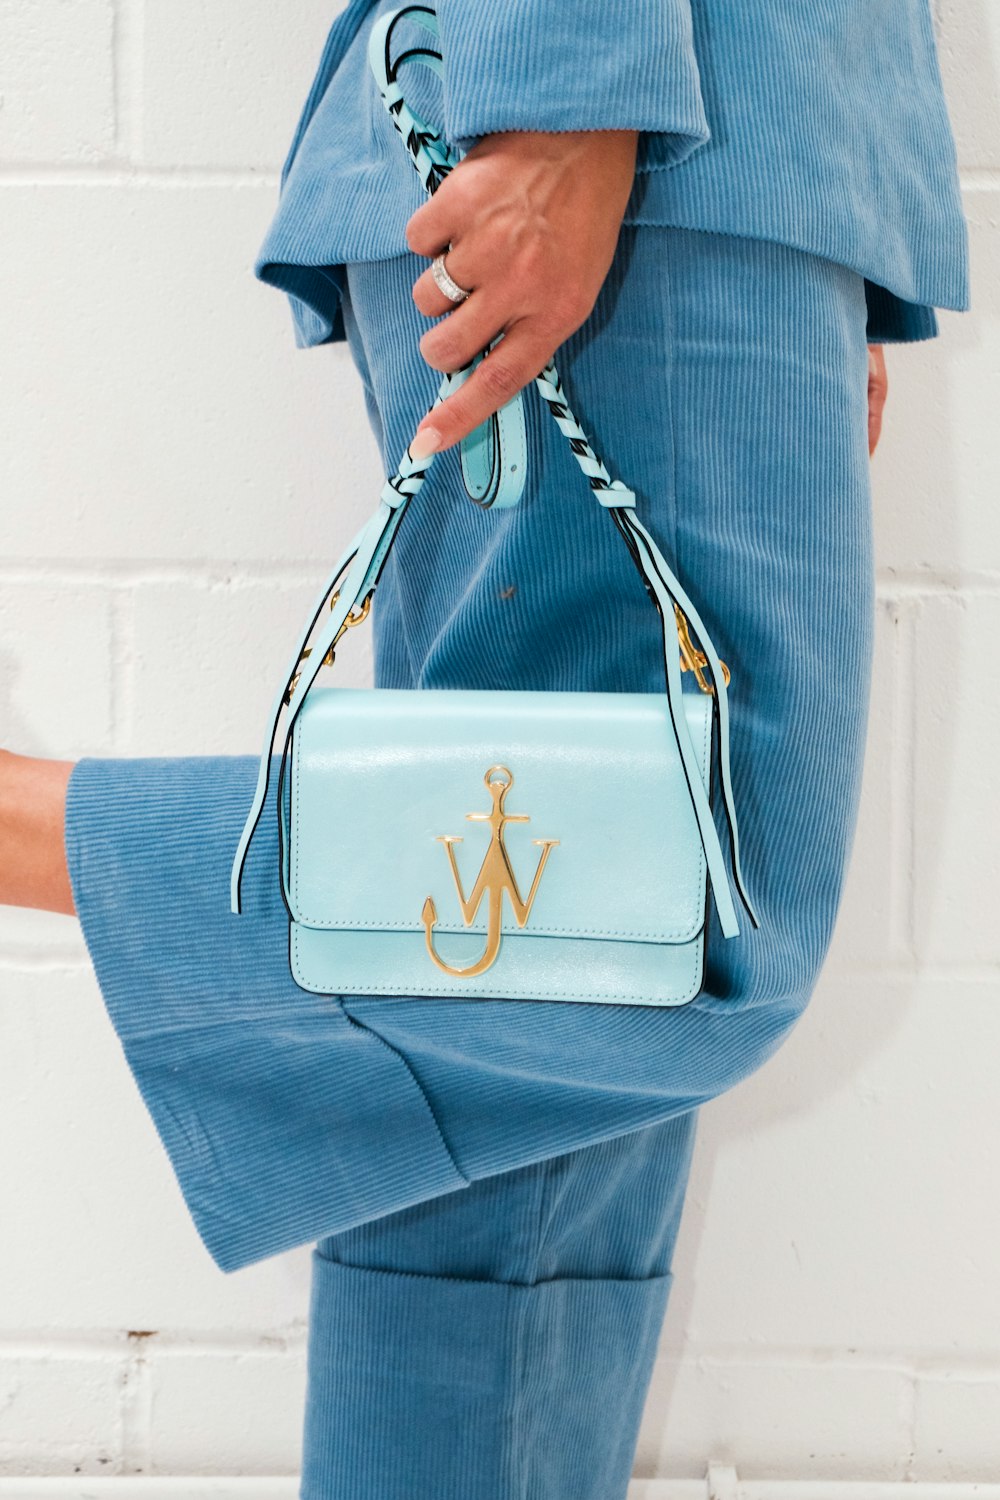 person in blue denim jeans holding white leather handbag